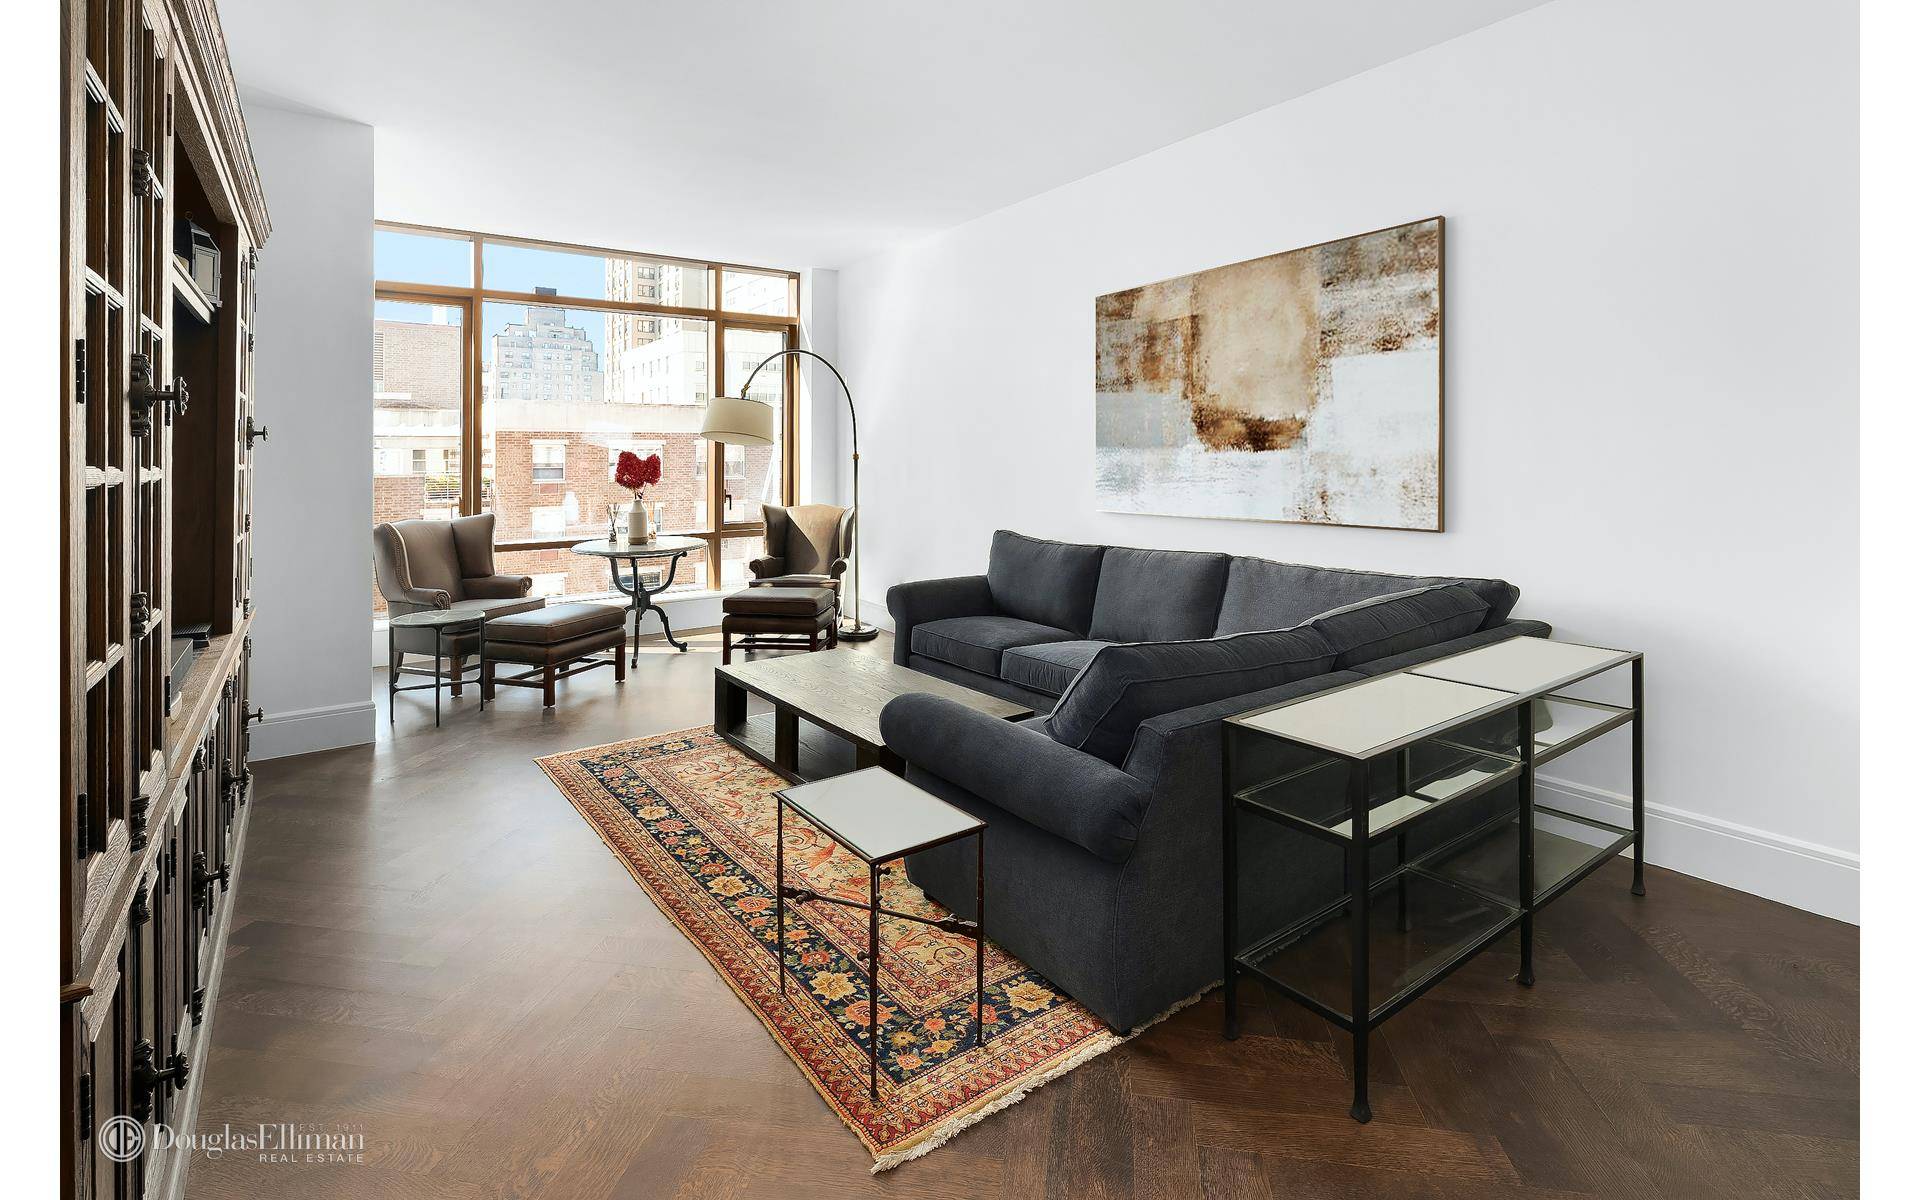 FURNISHED Luxury Rental at newly developed Gramercy Square.